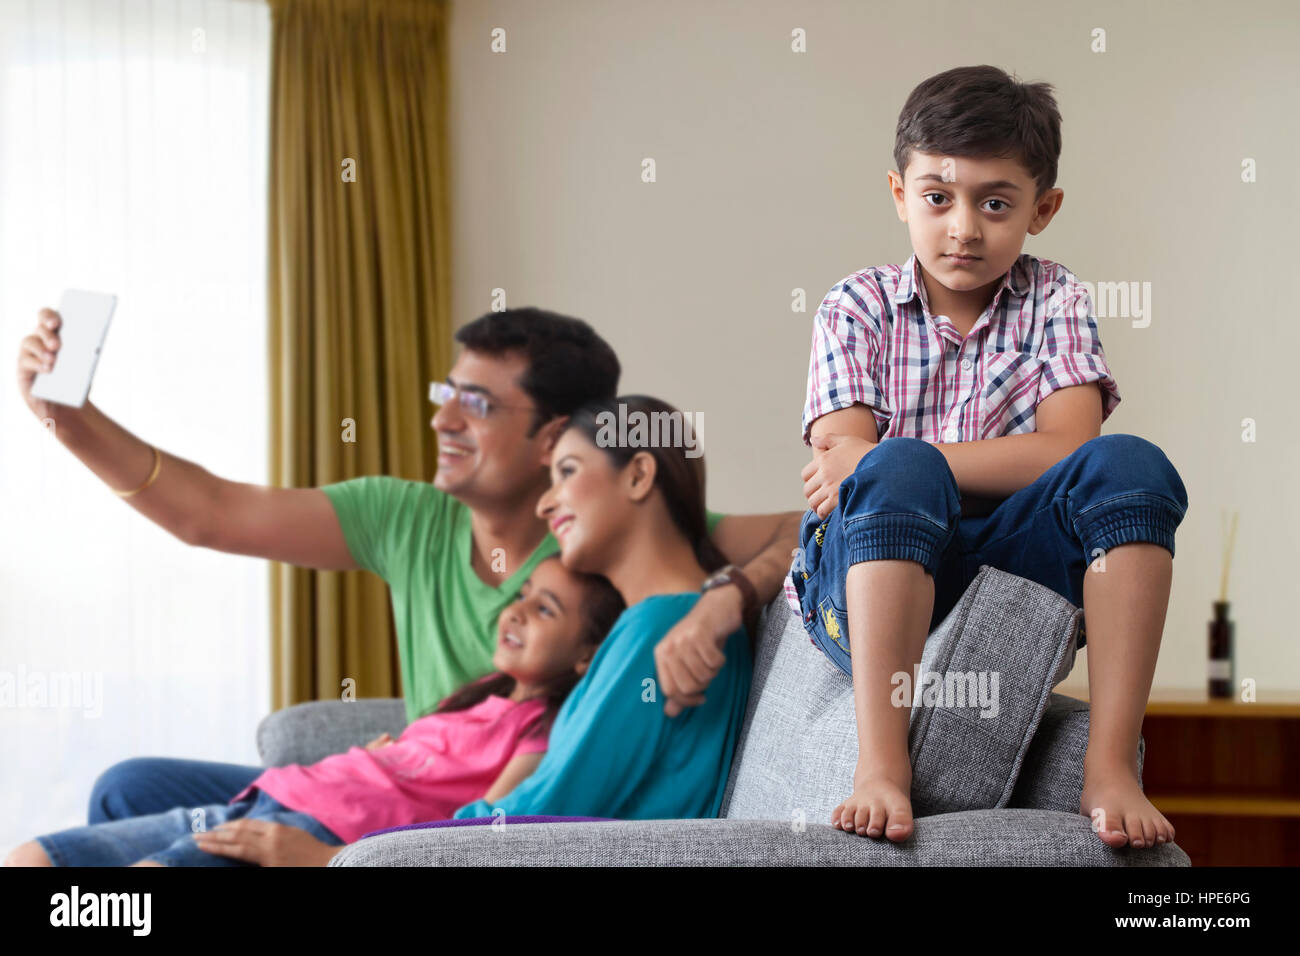 Conflicts with family, Portrait of serious boy with his parents and sister using digital tablet in the background Stock Photo